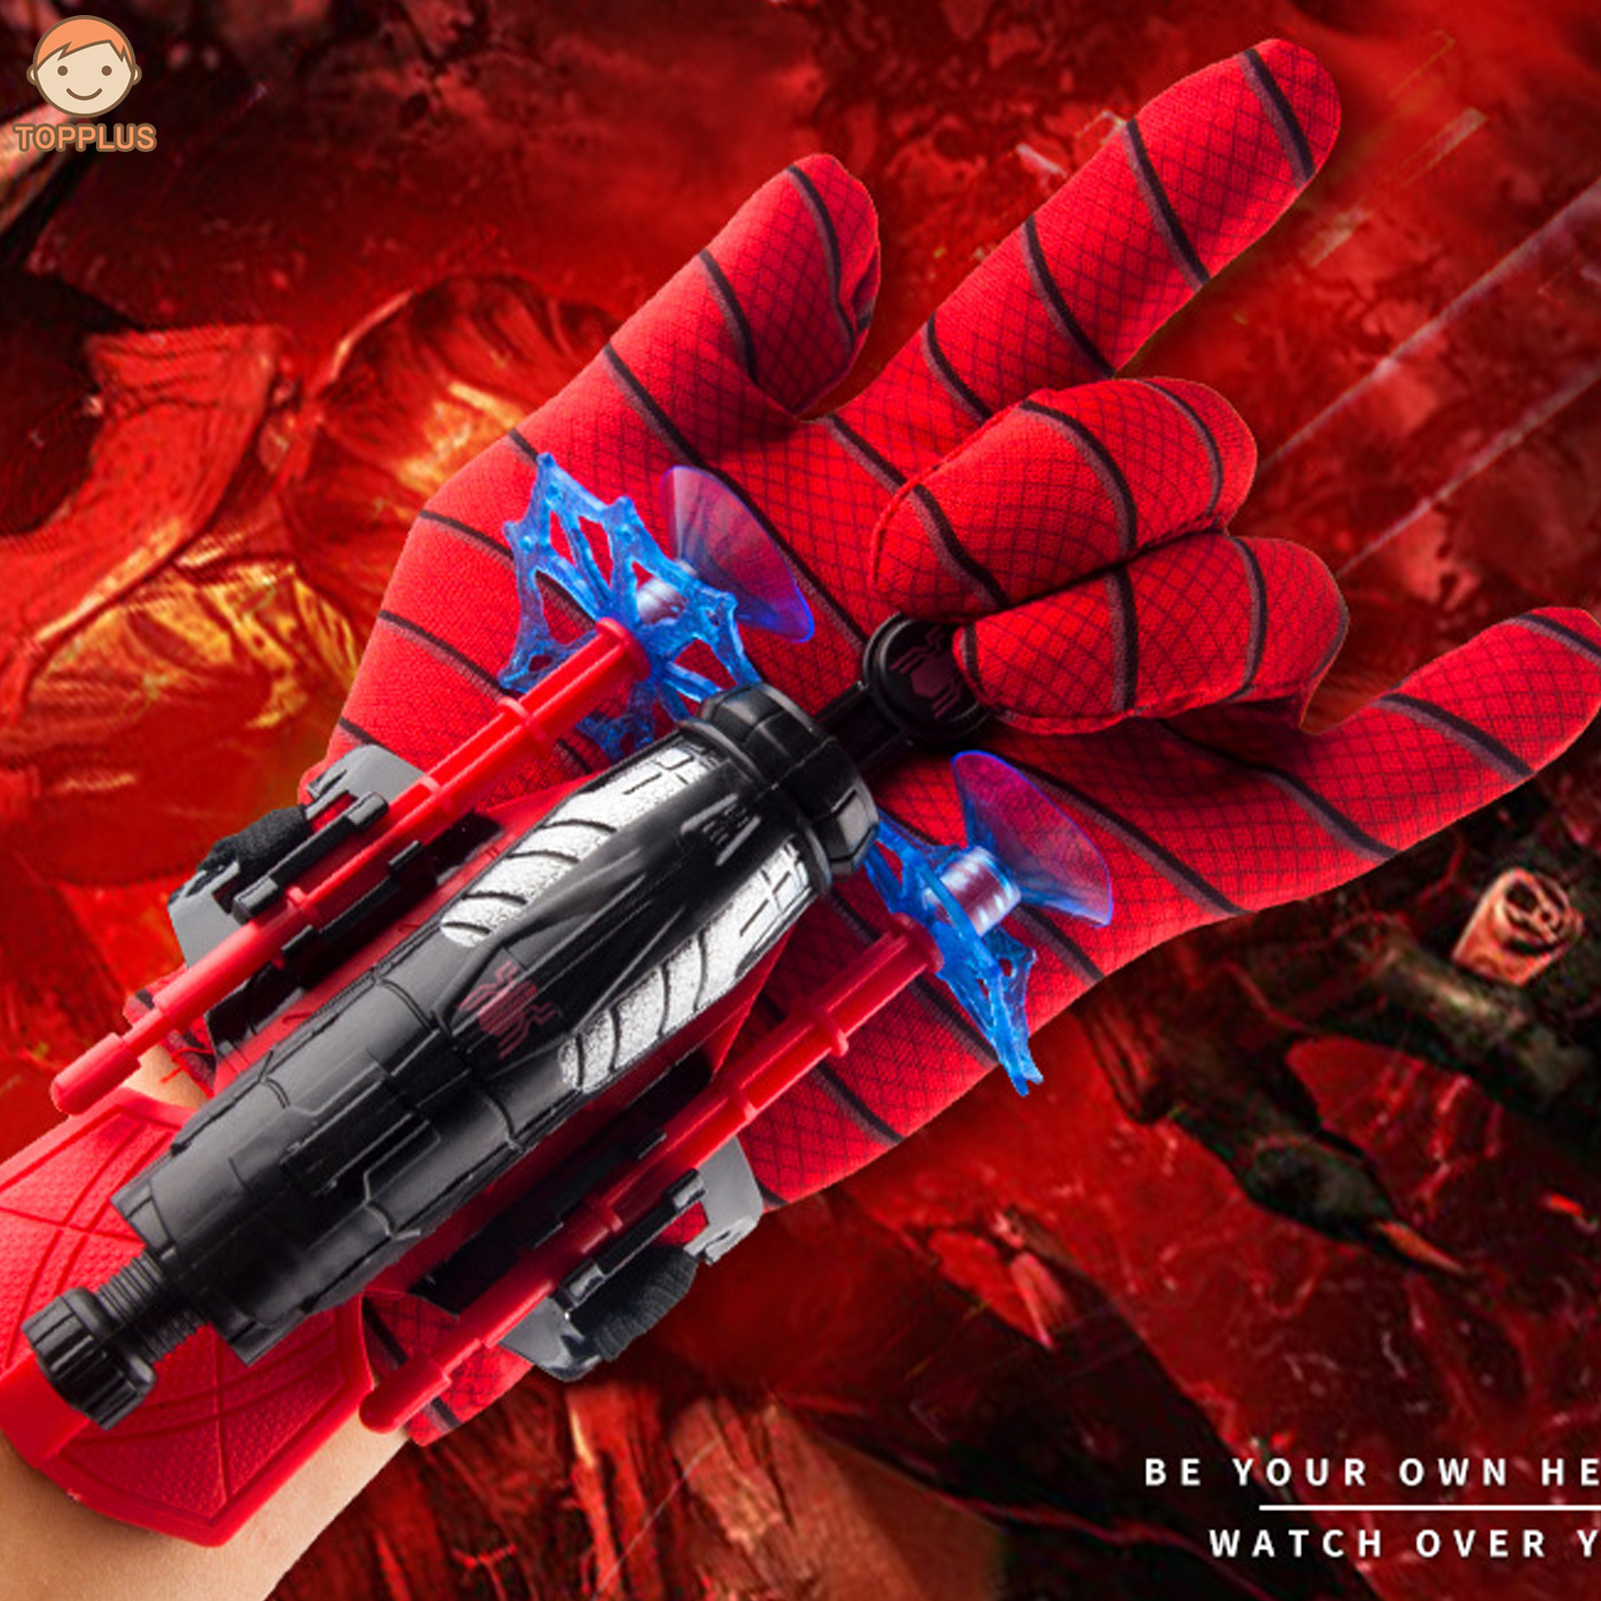 Ready TOPPLUS Spider Web Shooters Bracers Nontoxic Safe Odorless Soft